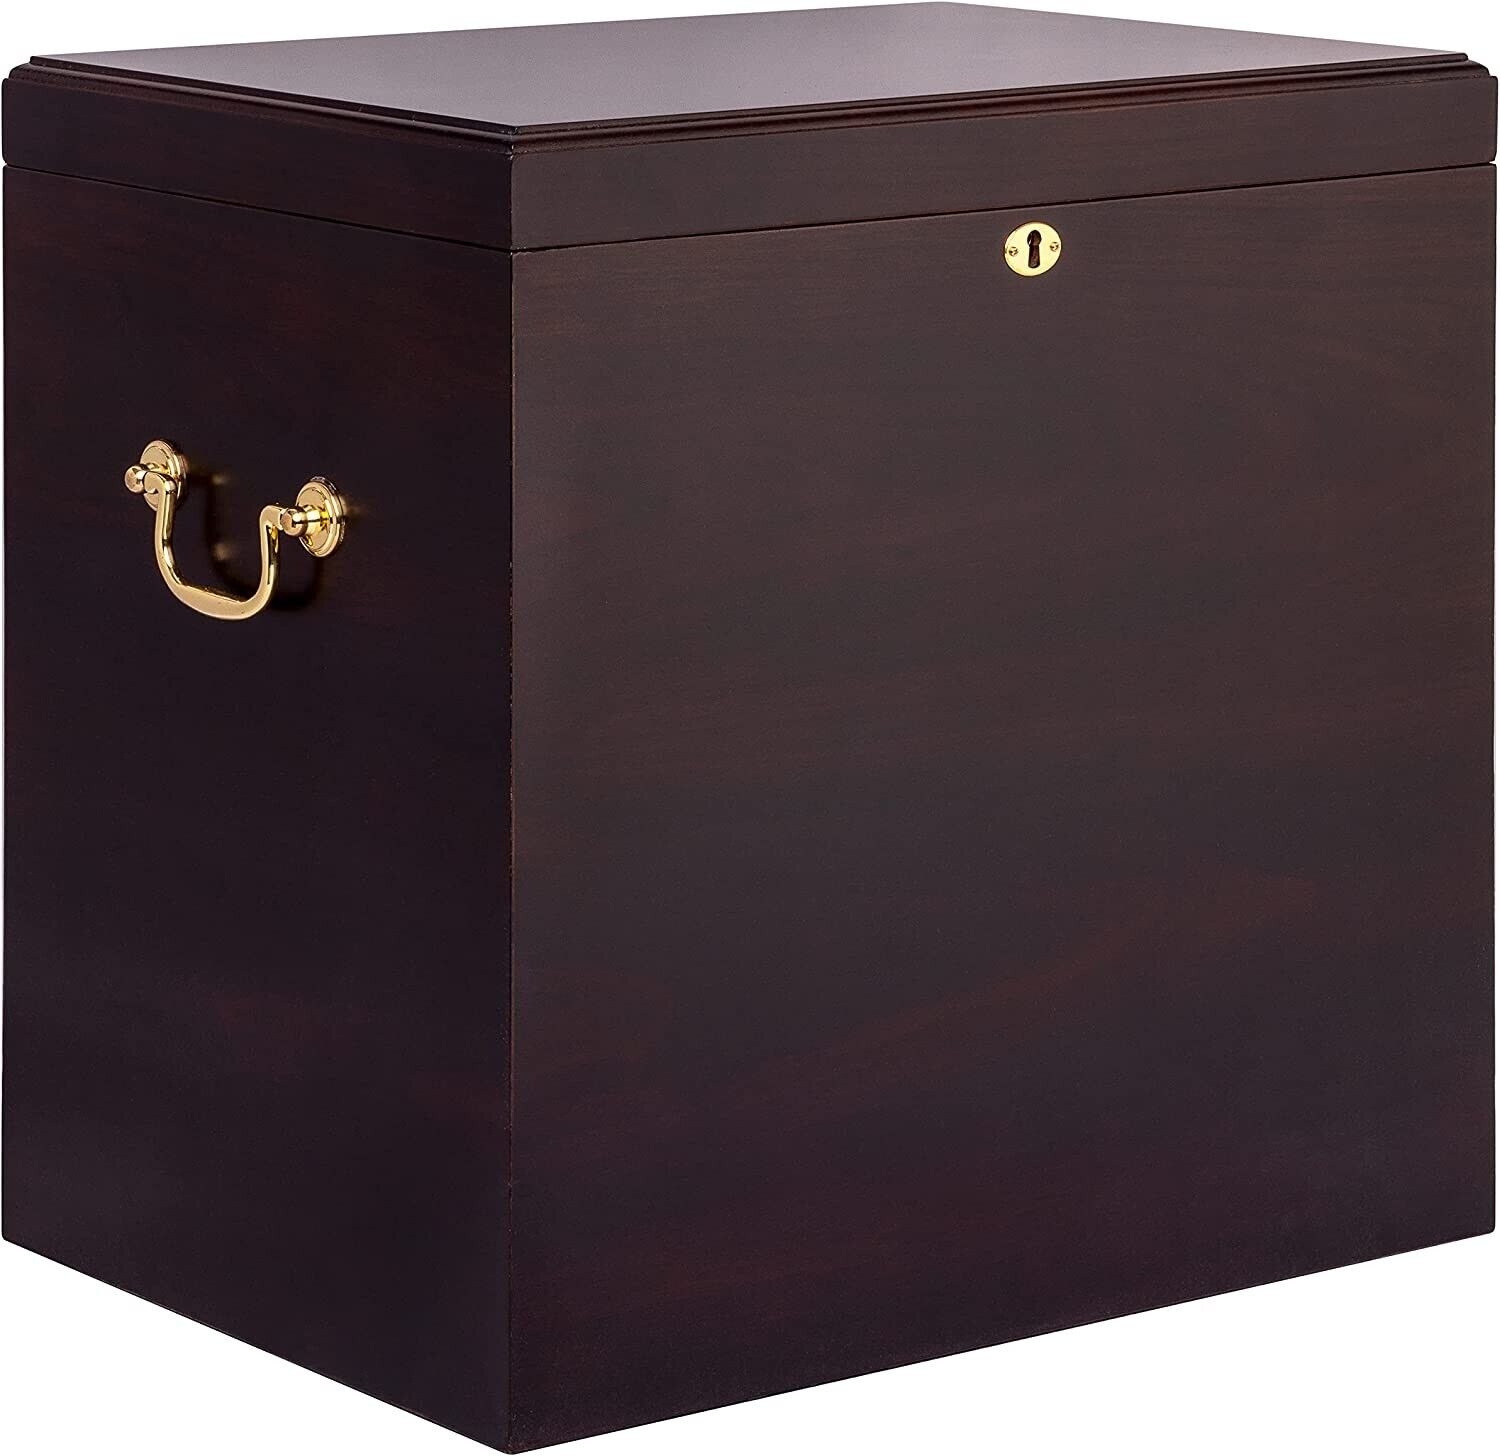 Quality Importers Medici Premium Quality Humidor for Up to 500 Cigars